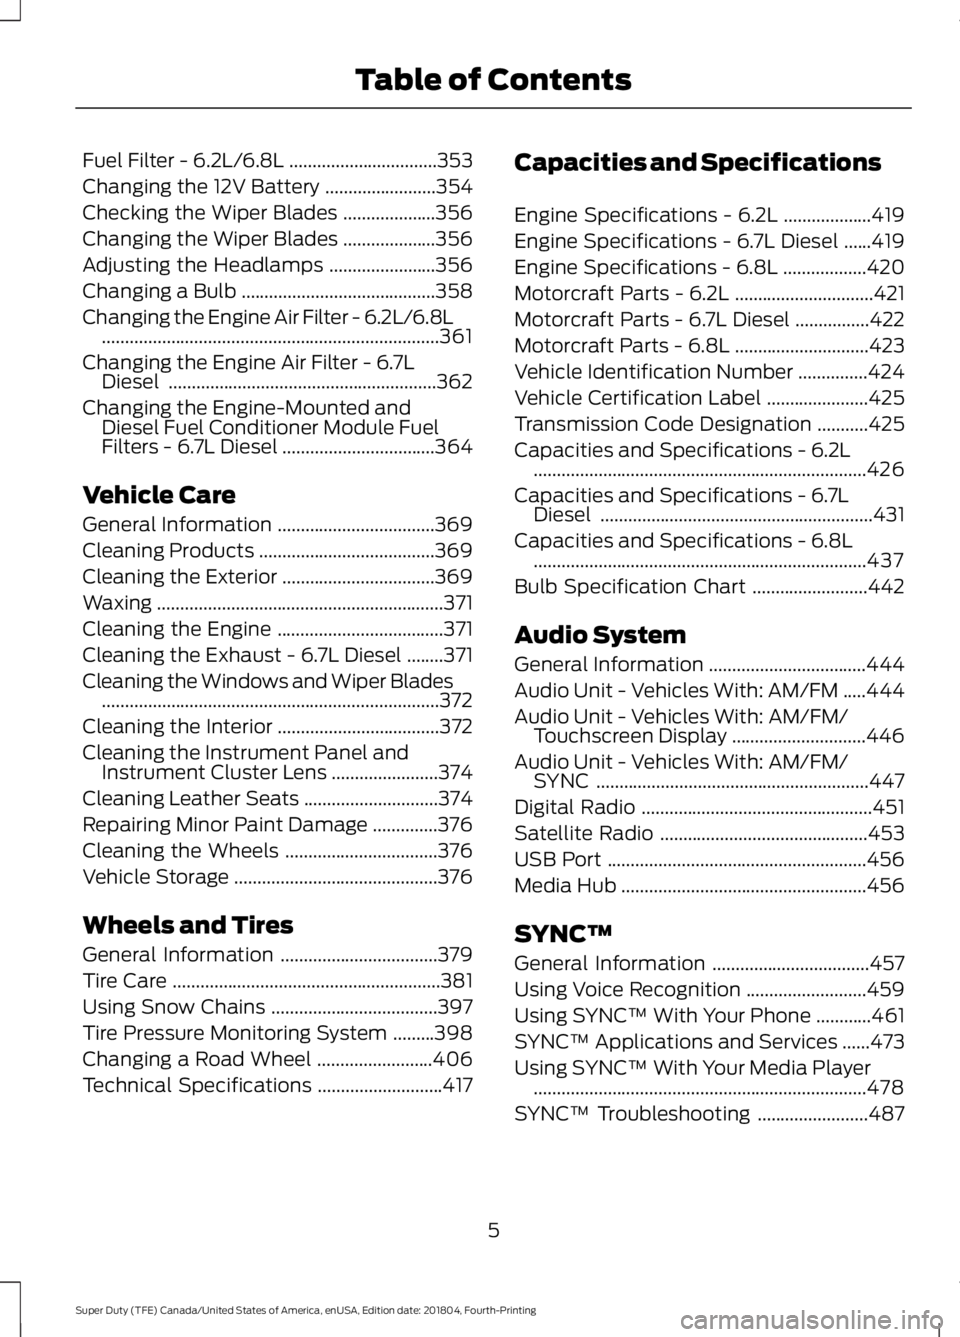 FORD SUPER DUTY 2019  Owners Manual Fuel Filter - 6.2L/6.8L
................................353
Changing the 12V Battery ........................
354
Checking the Wiper Blades ....................
356
Changing the Wiper Blades .........